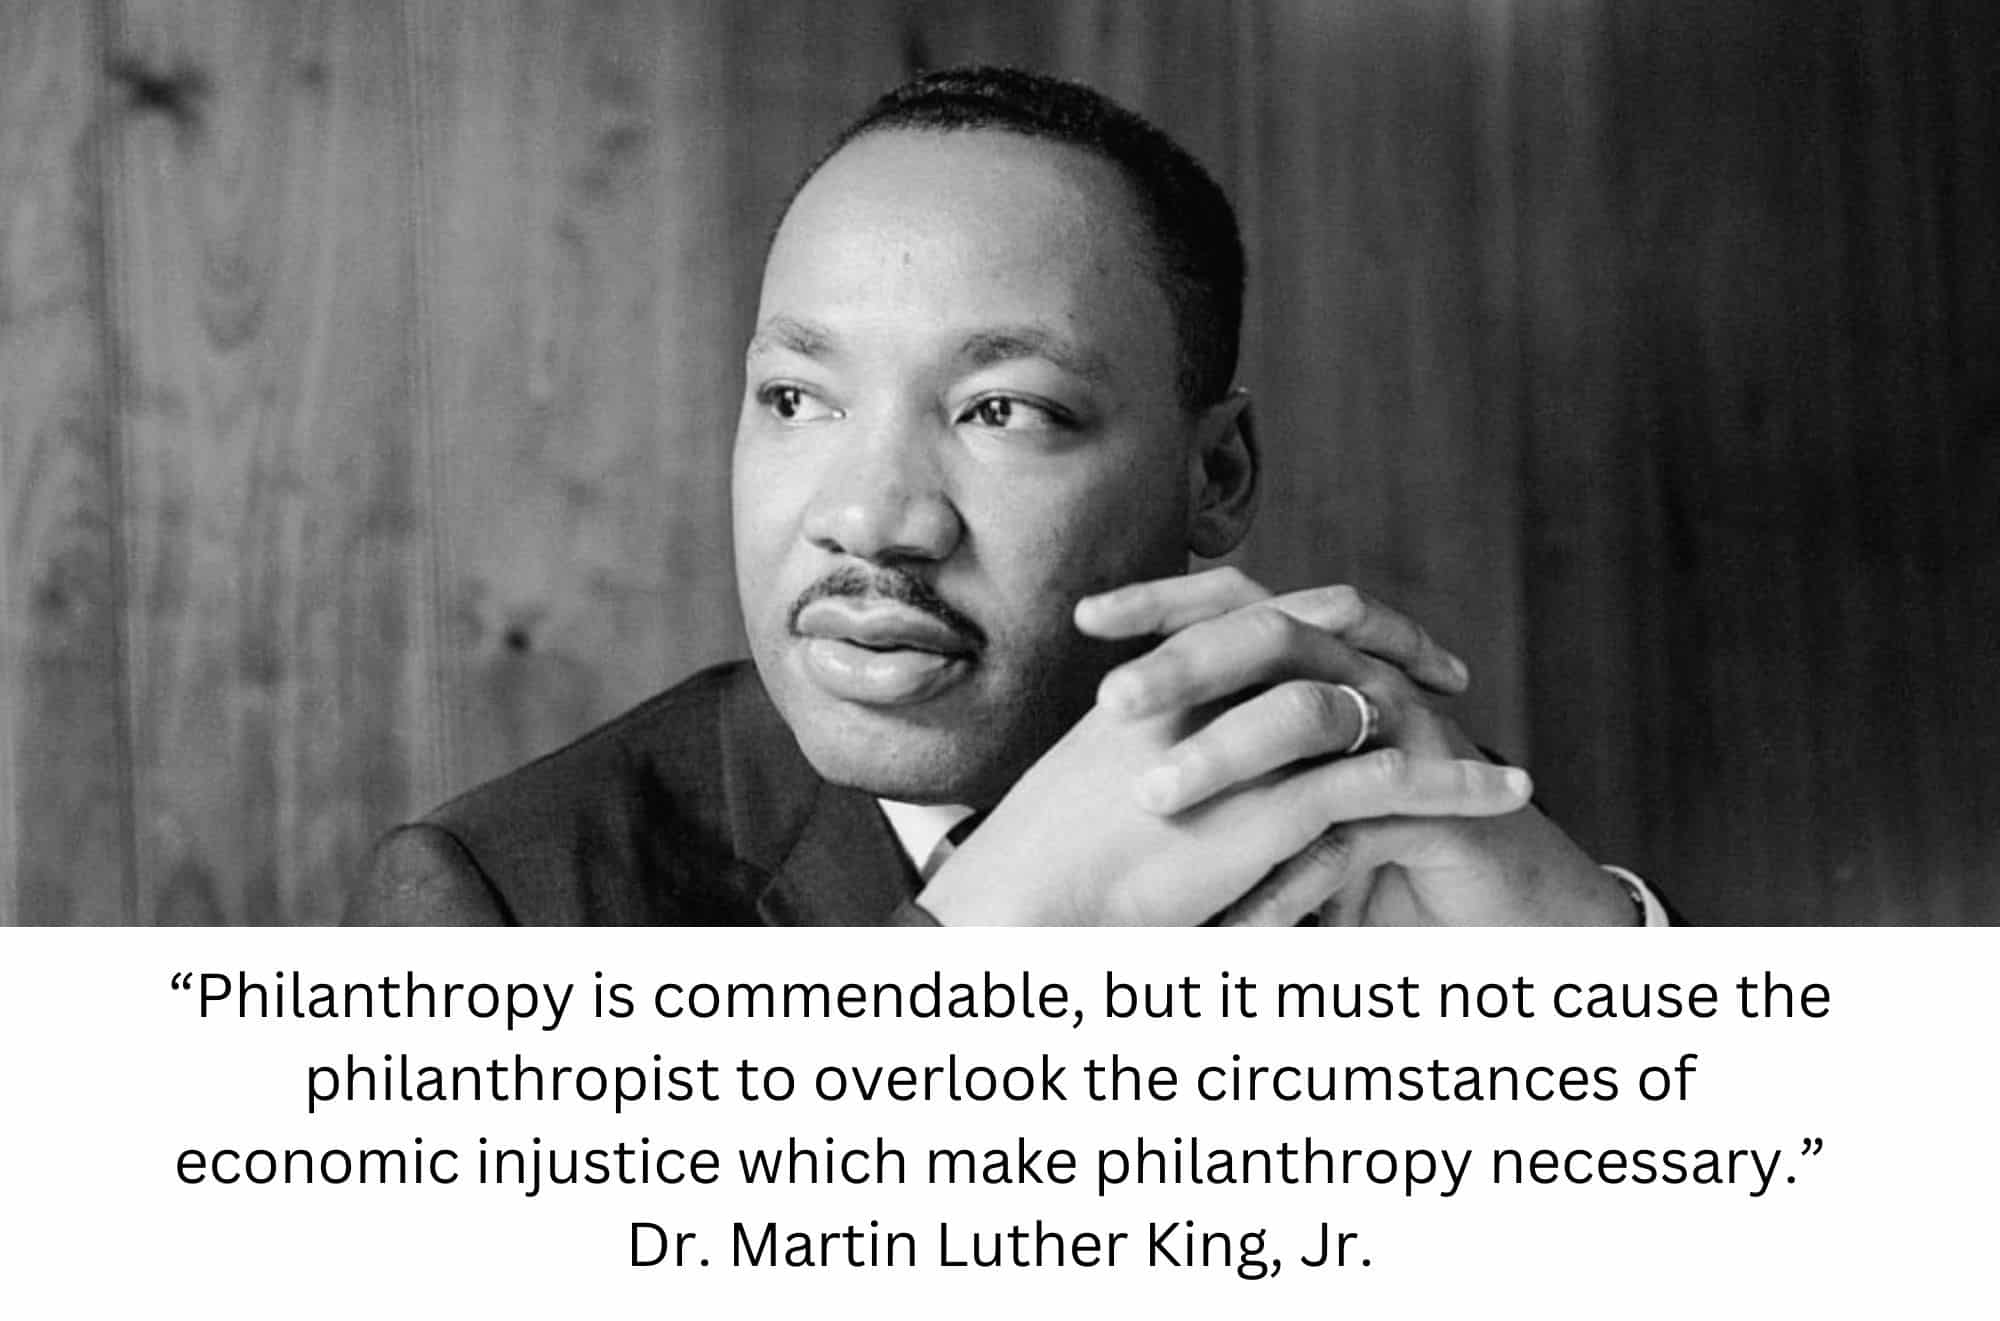 Philanthropy is commendable but... Martin Luther King, Jr.